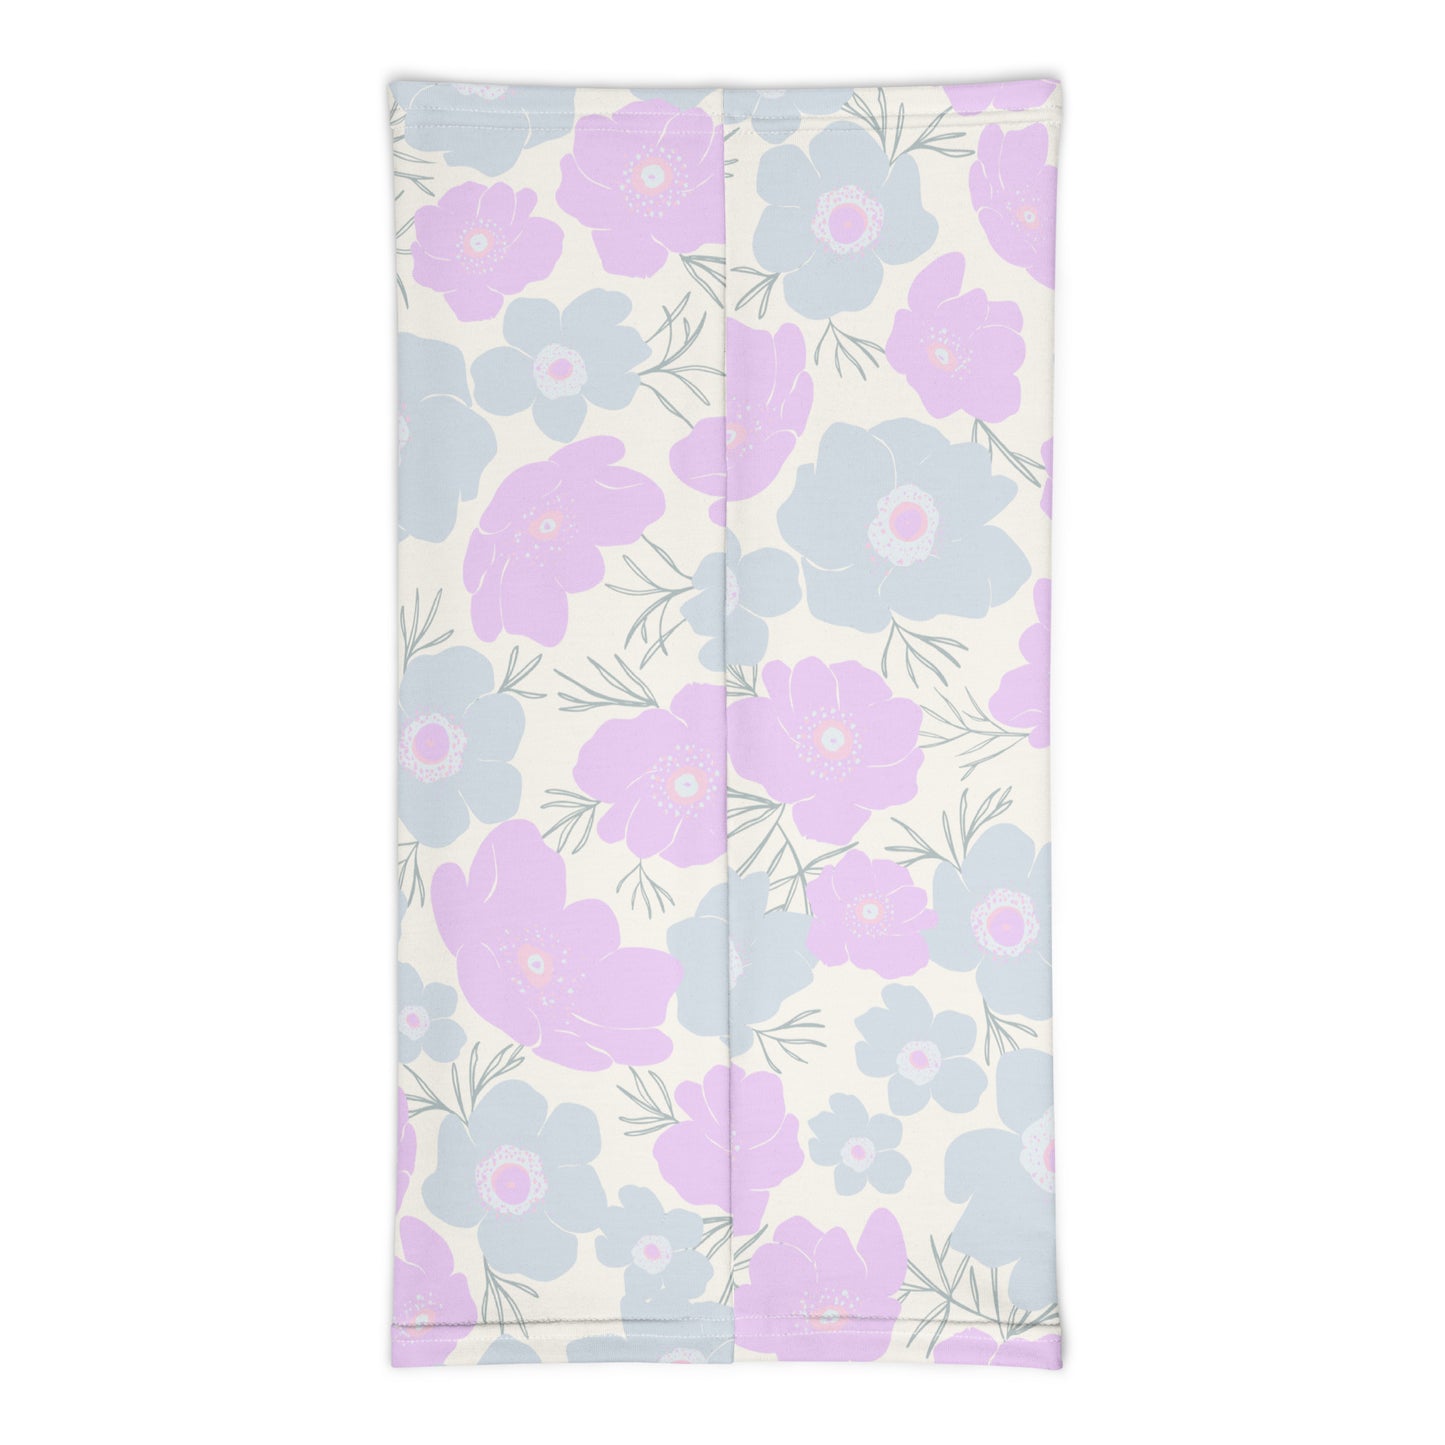 Pastel Floral - Sustainably Made Neck Gaiter